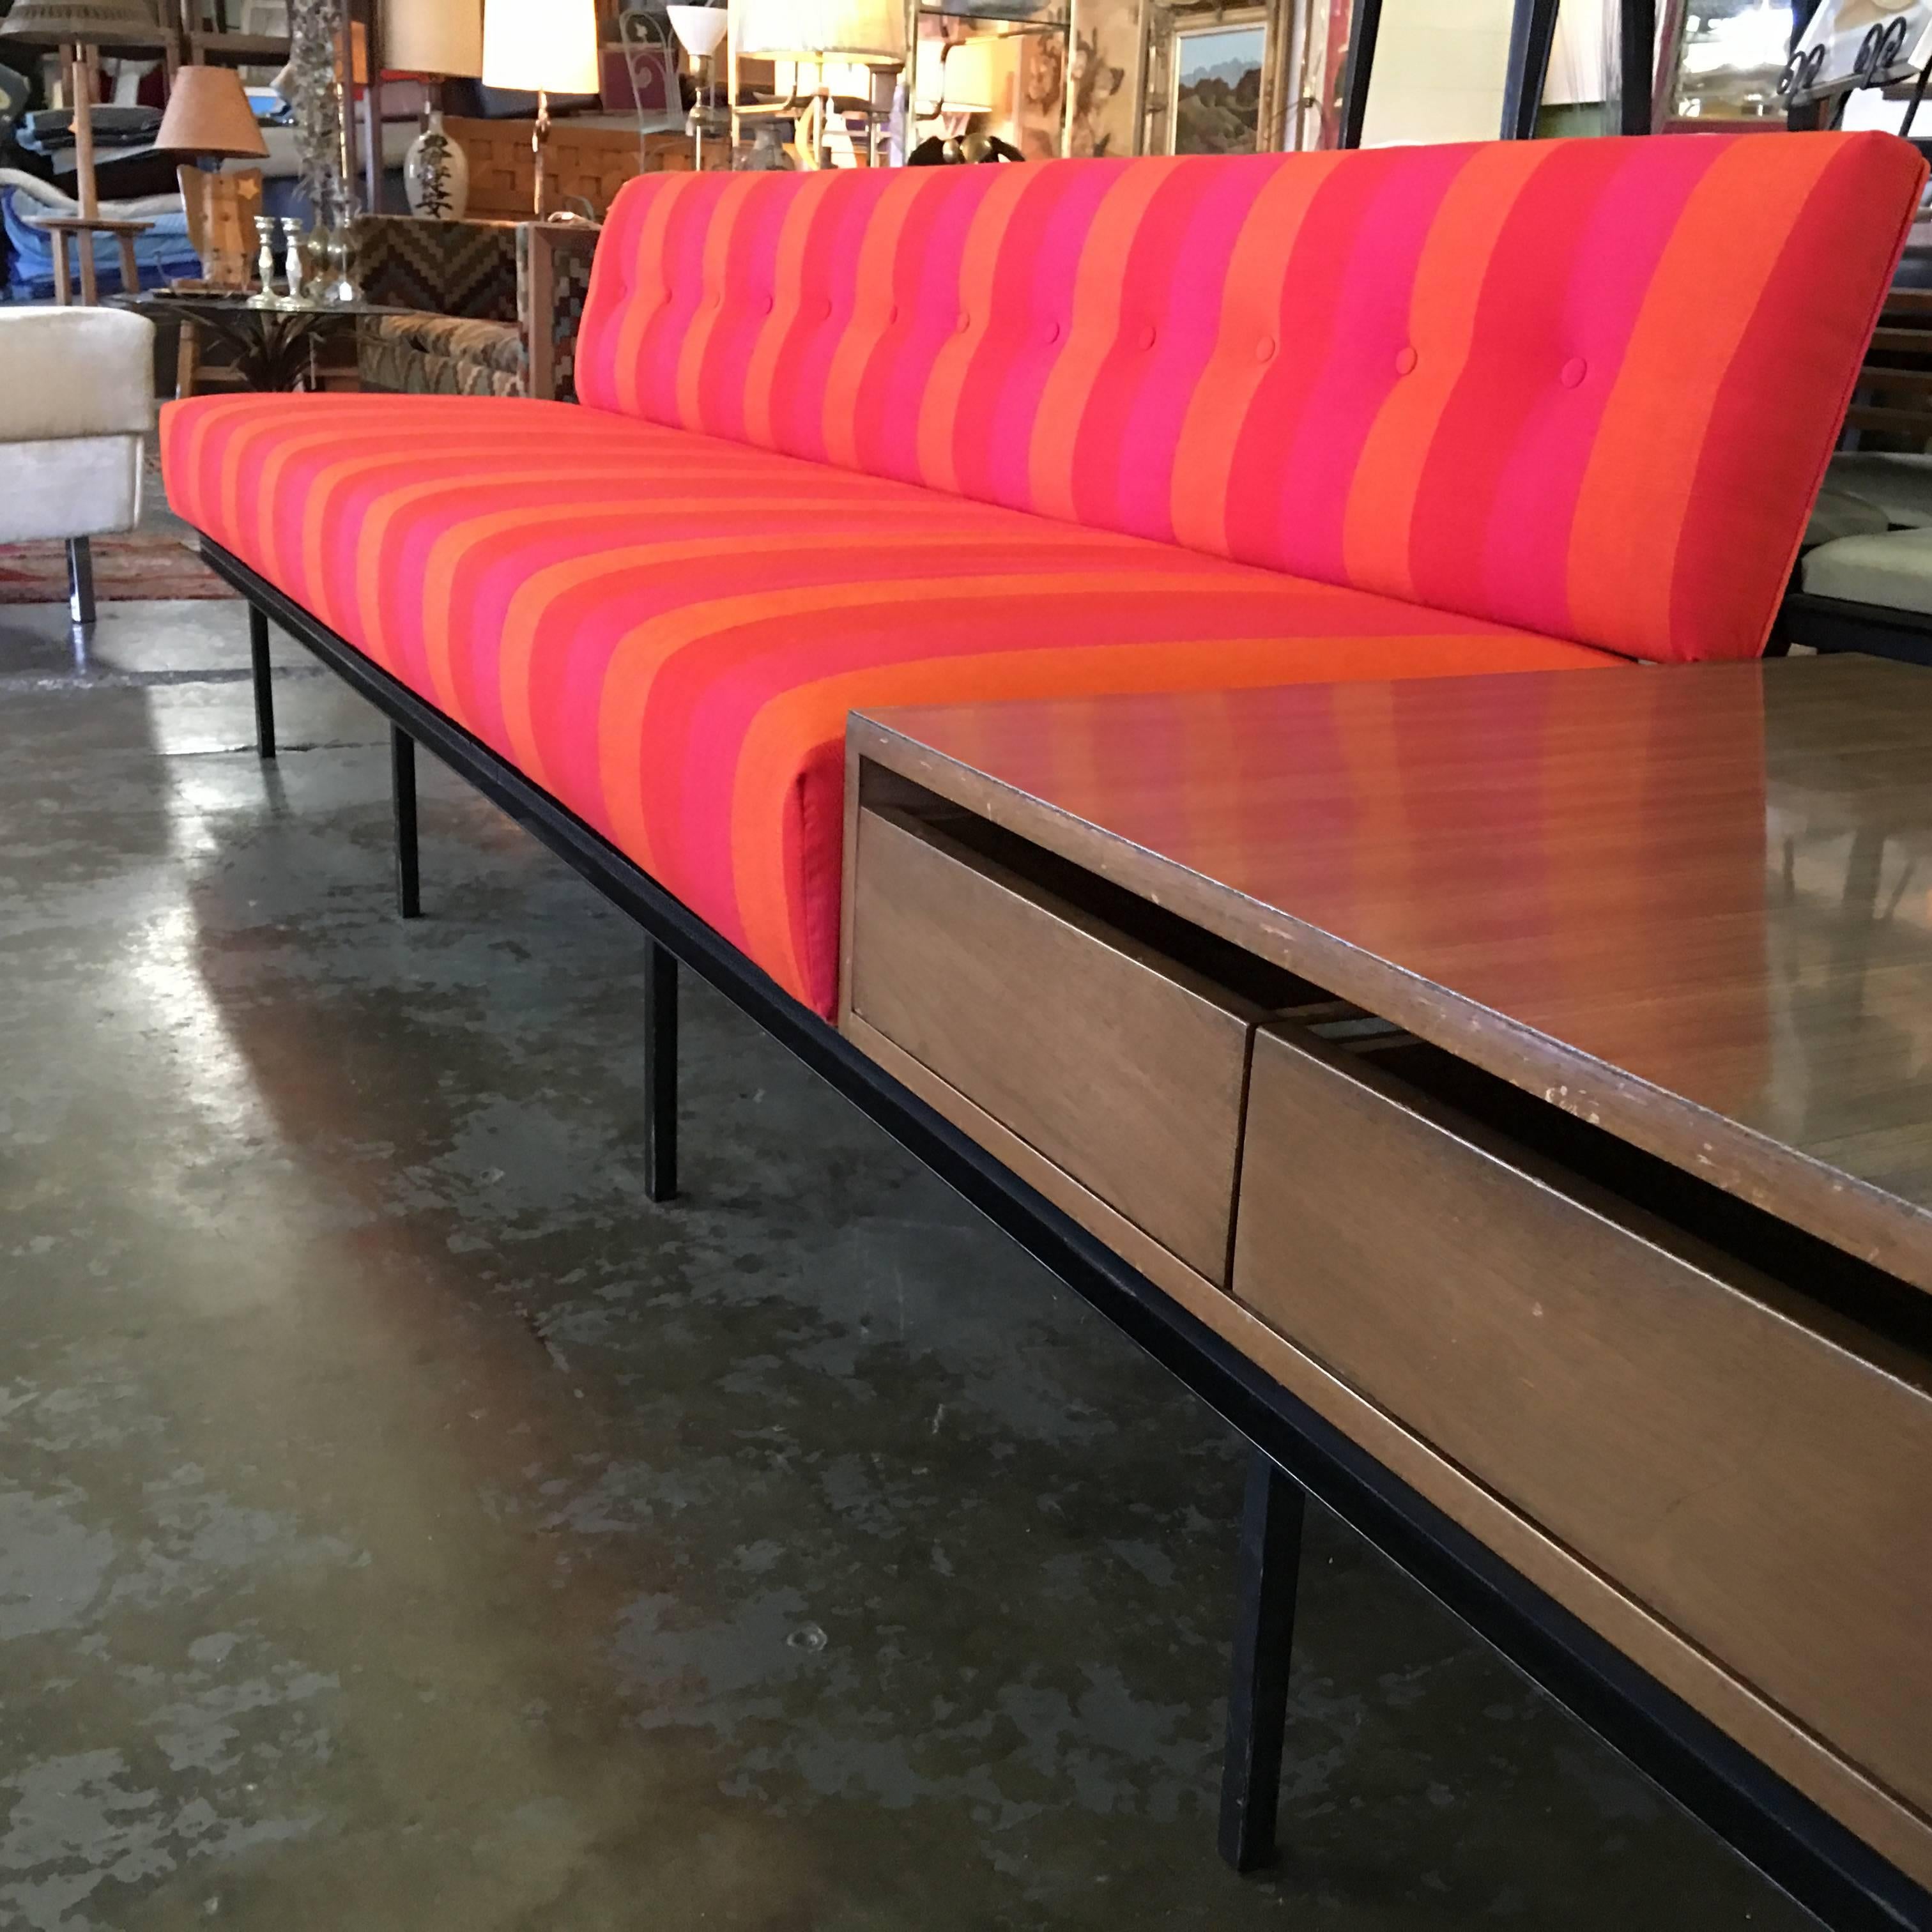 This is a vintage 1950s original Florence Knoll sofa. It is an early design for the company. It is comprised of an iron base with seat and back attached, and includes floating two-drawer end table, all in one! It is 10 feet long. Done in period